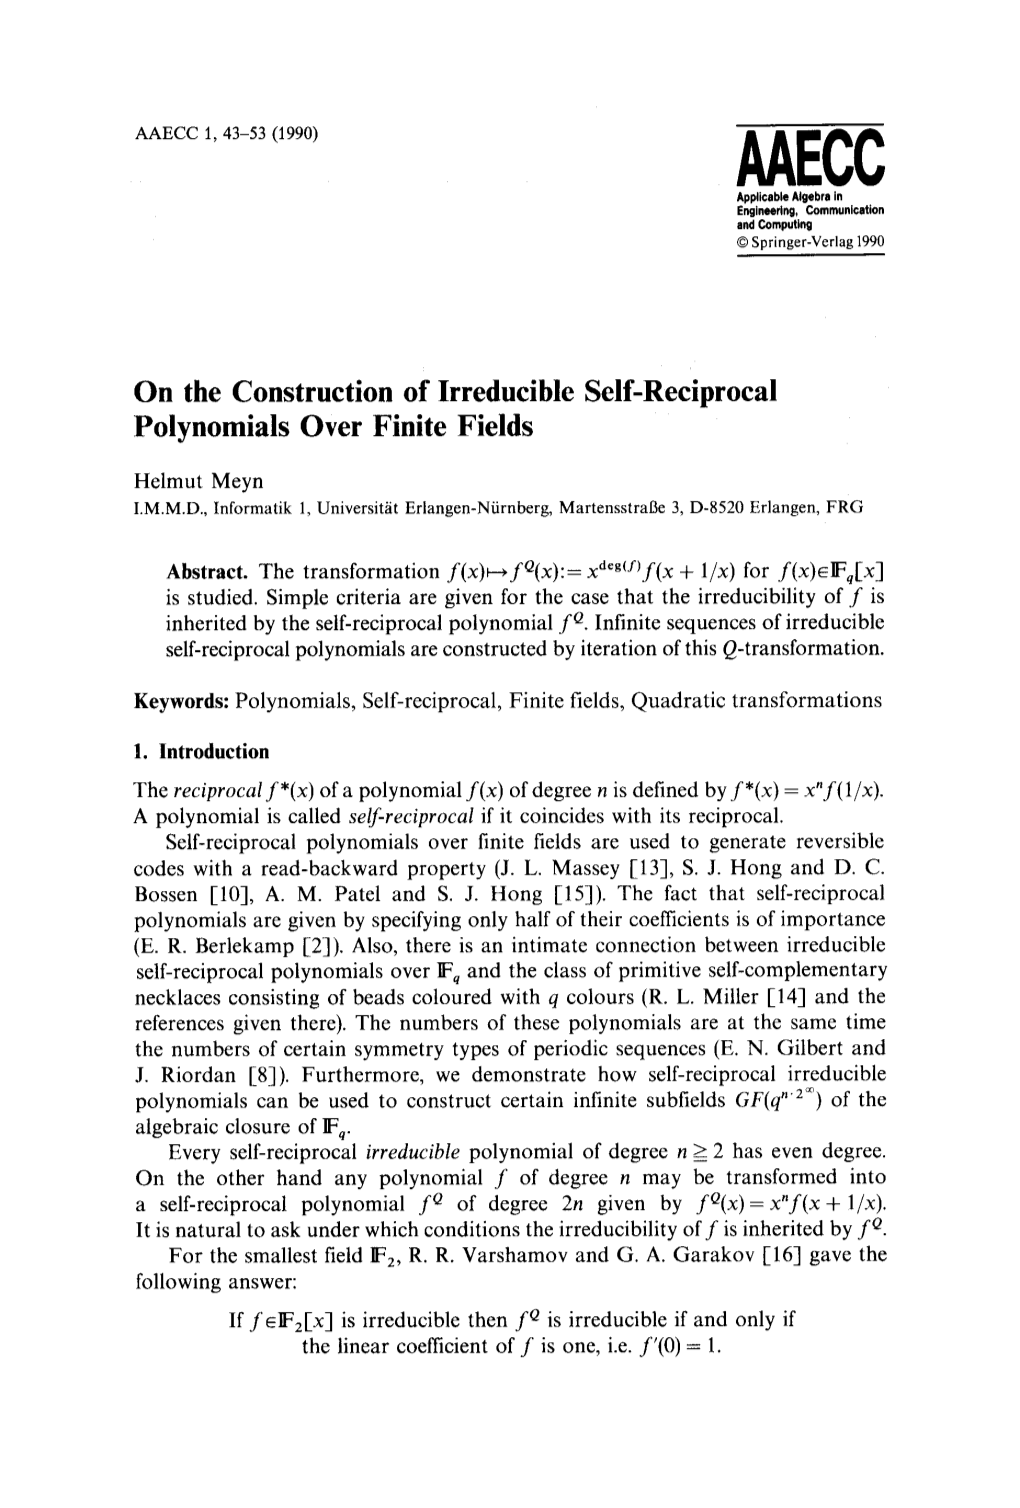 On the Construction of Irreducible Self-Reciprocal Polynomials Over Finite Fields